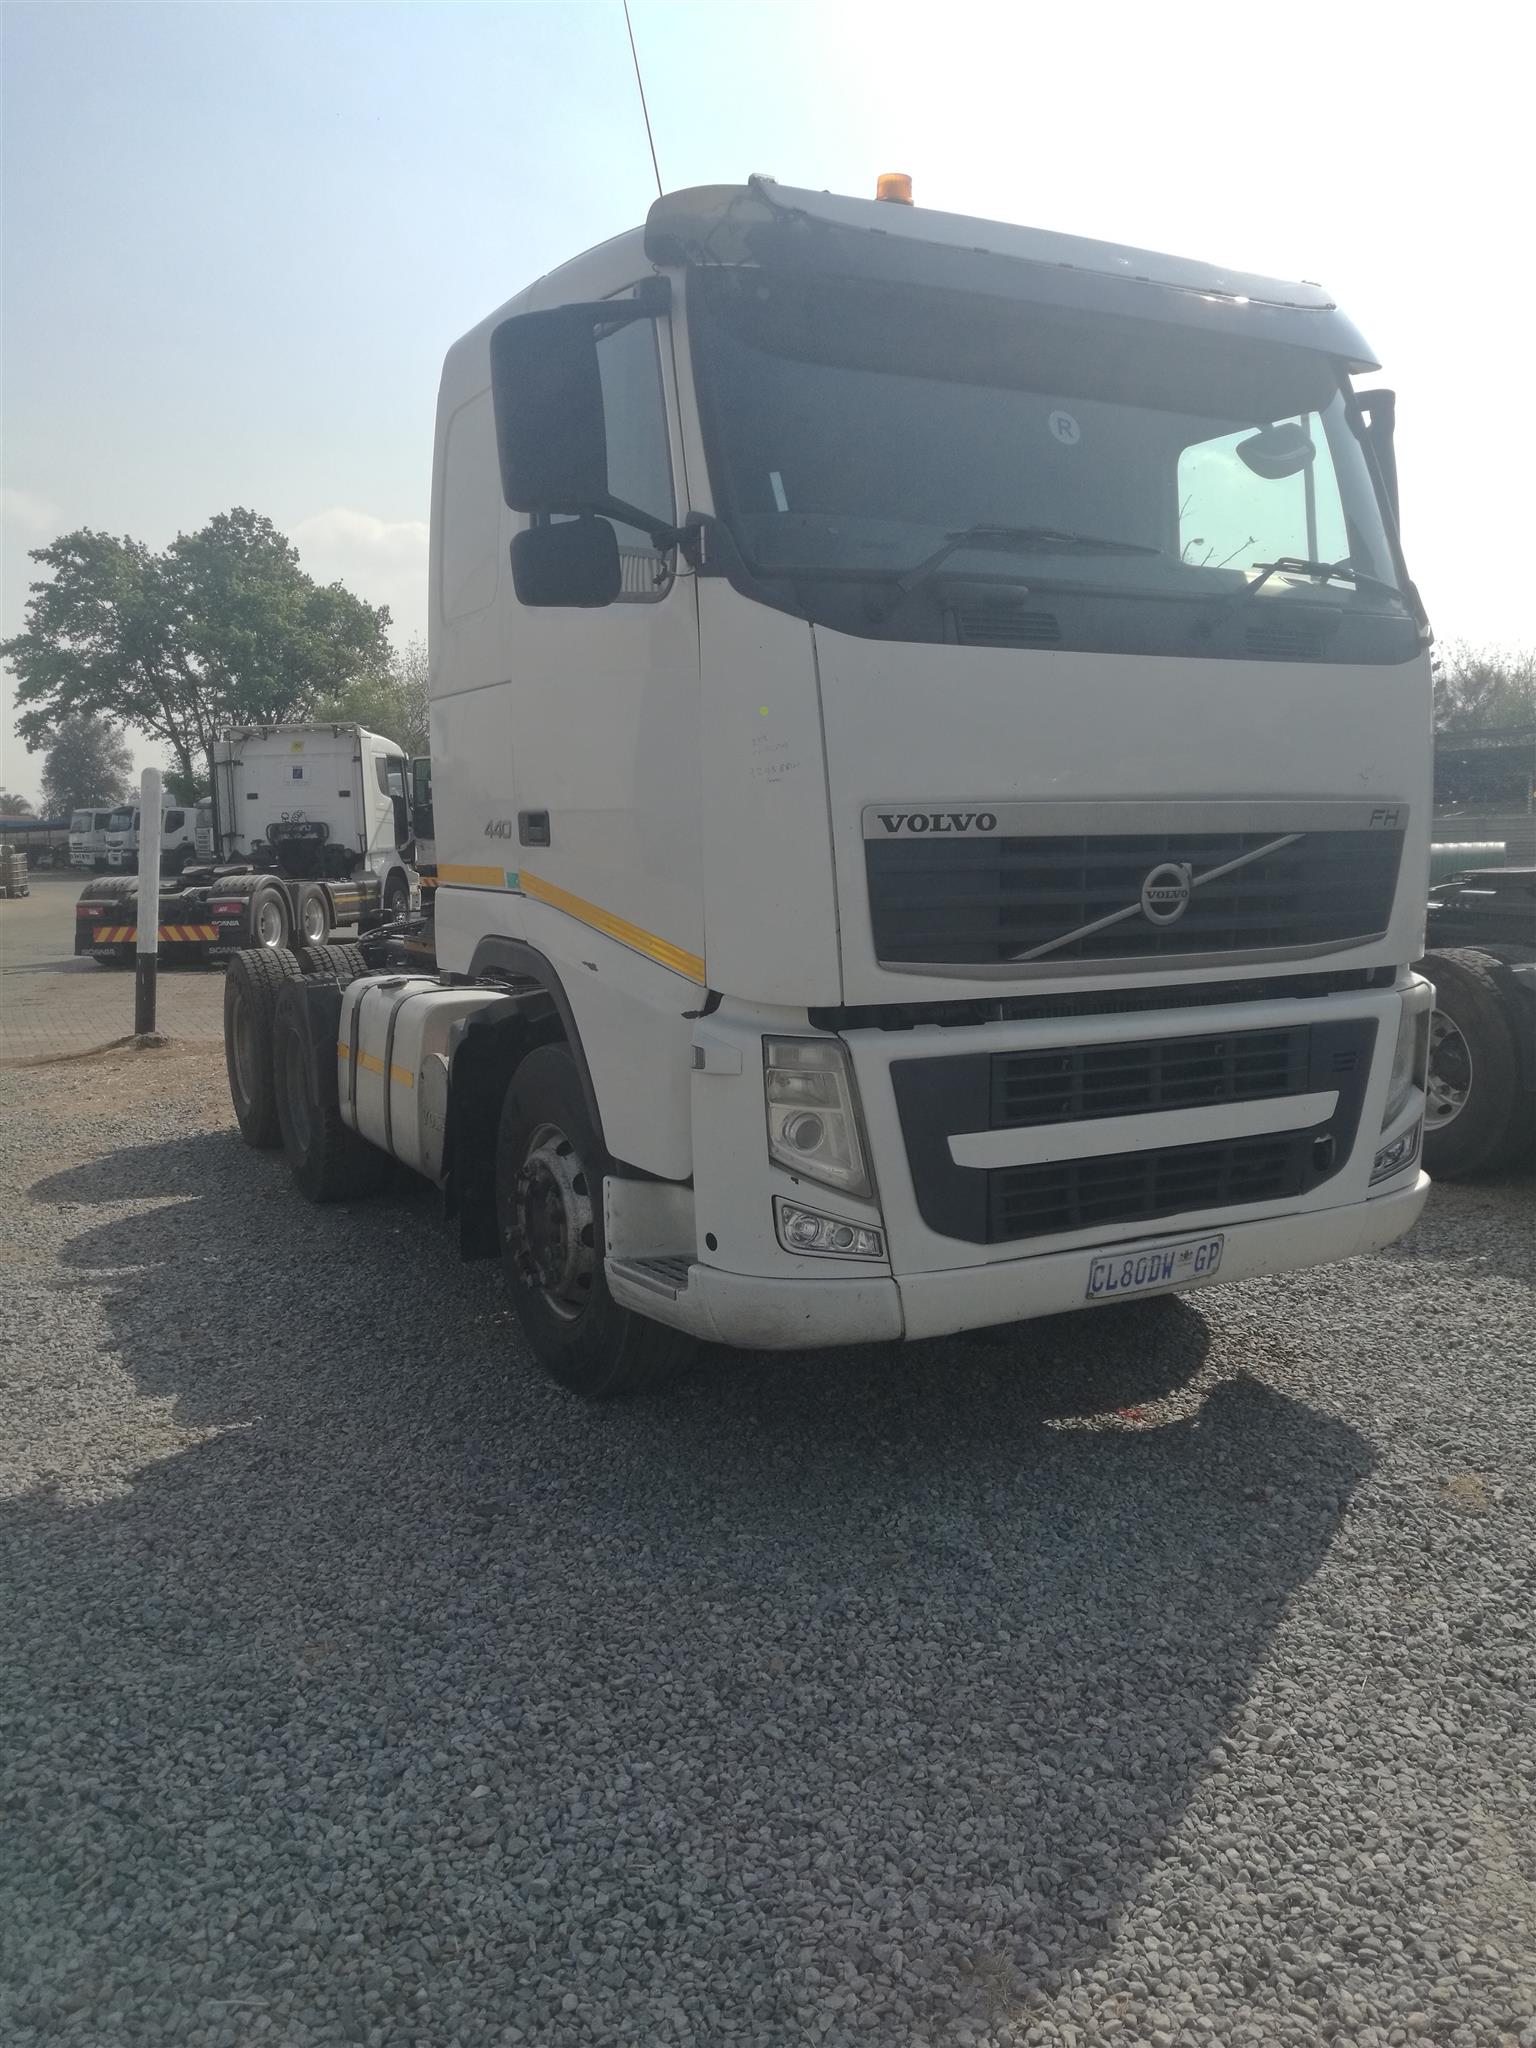 2013 VOLVO FH 440 DOUBLE DIFF HORSE FOR SALE IN GOOD CONDITION.